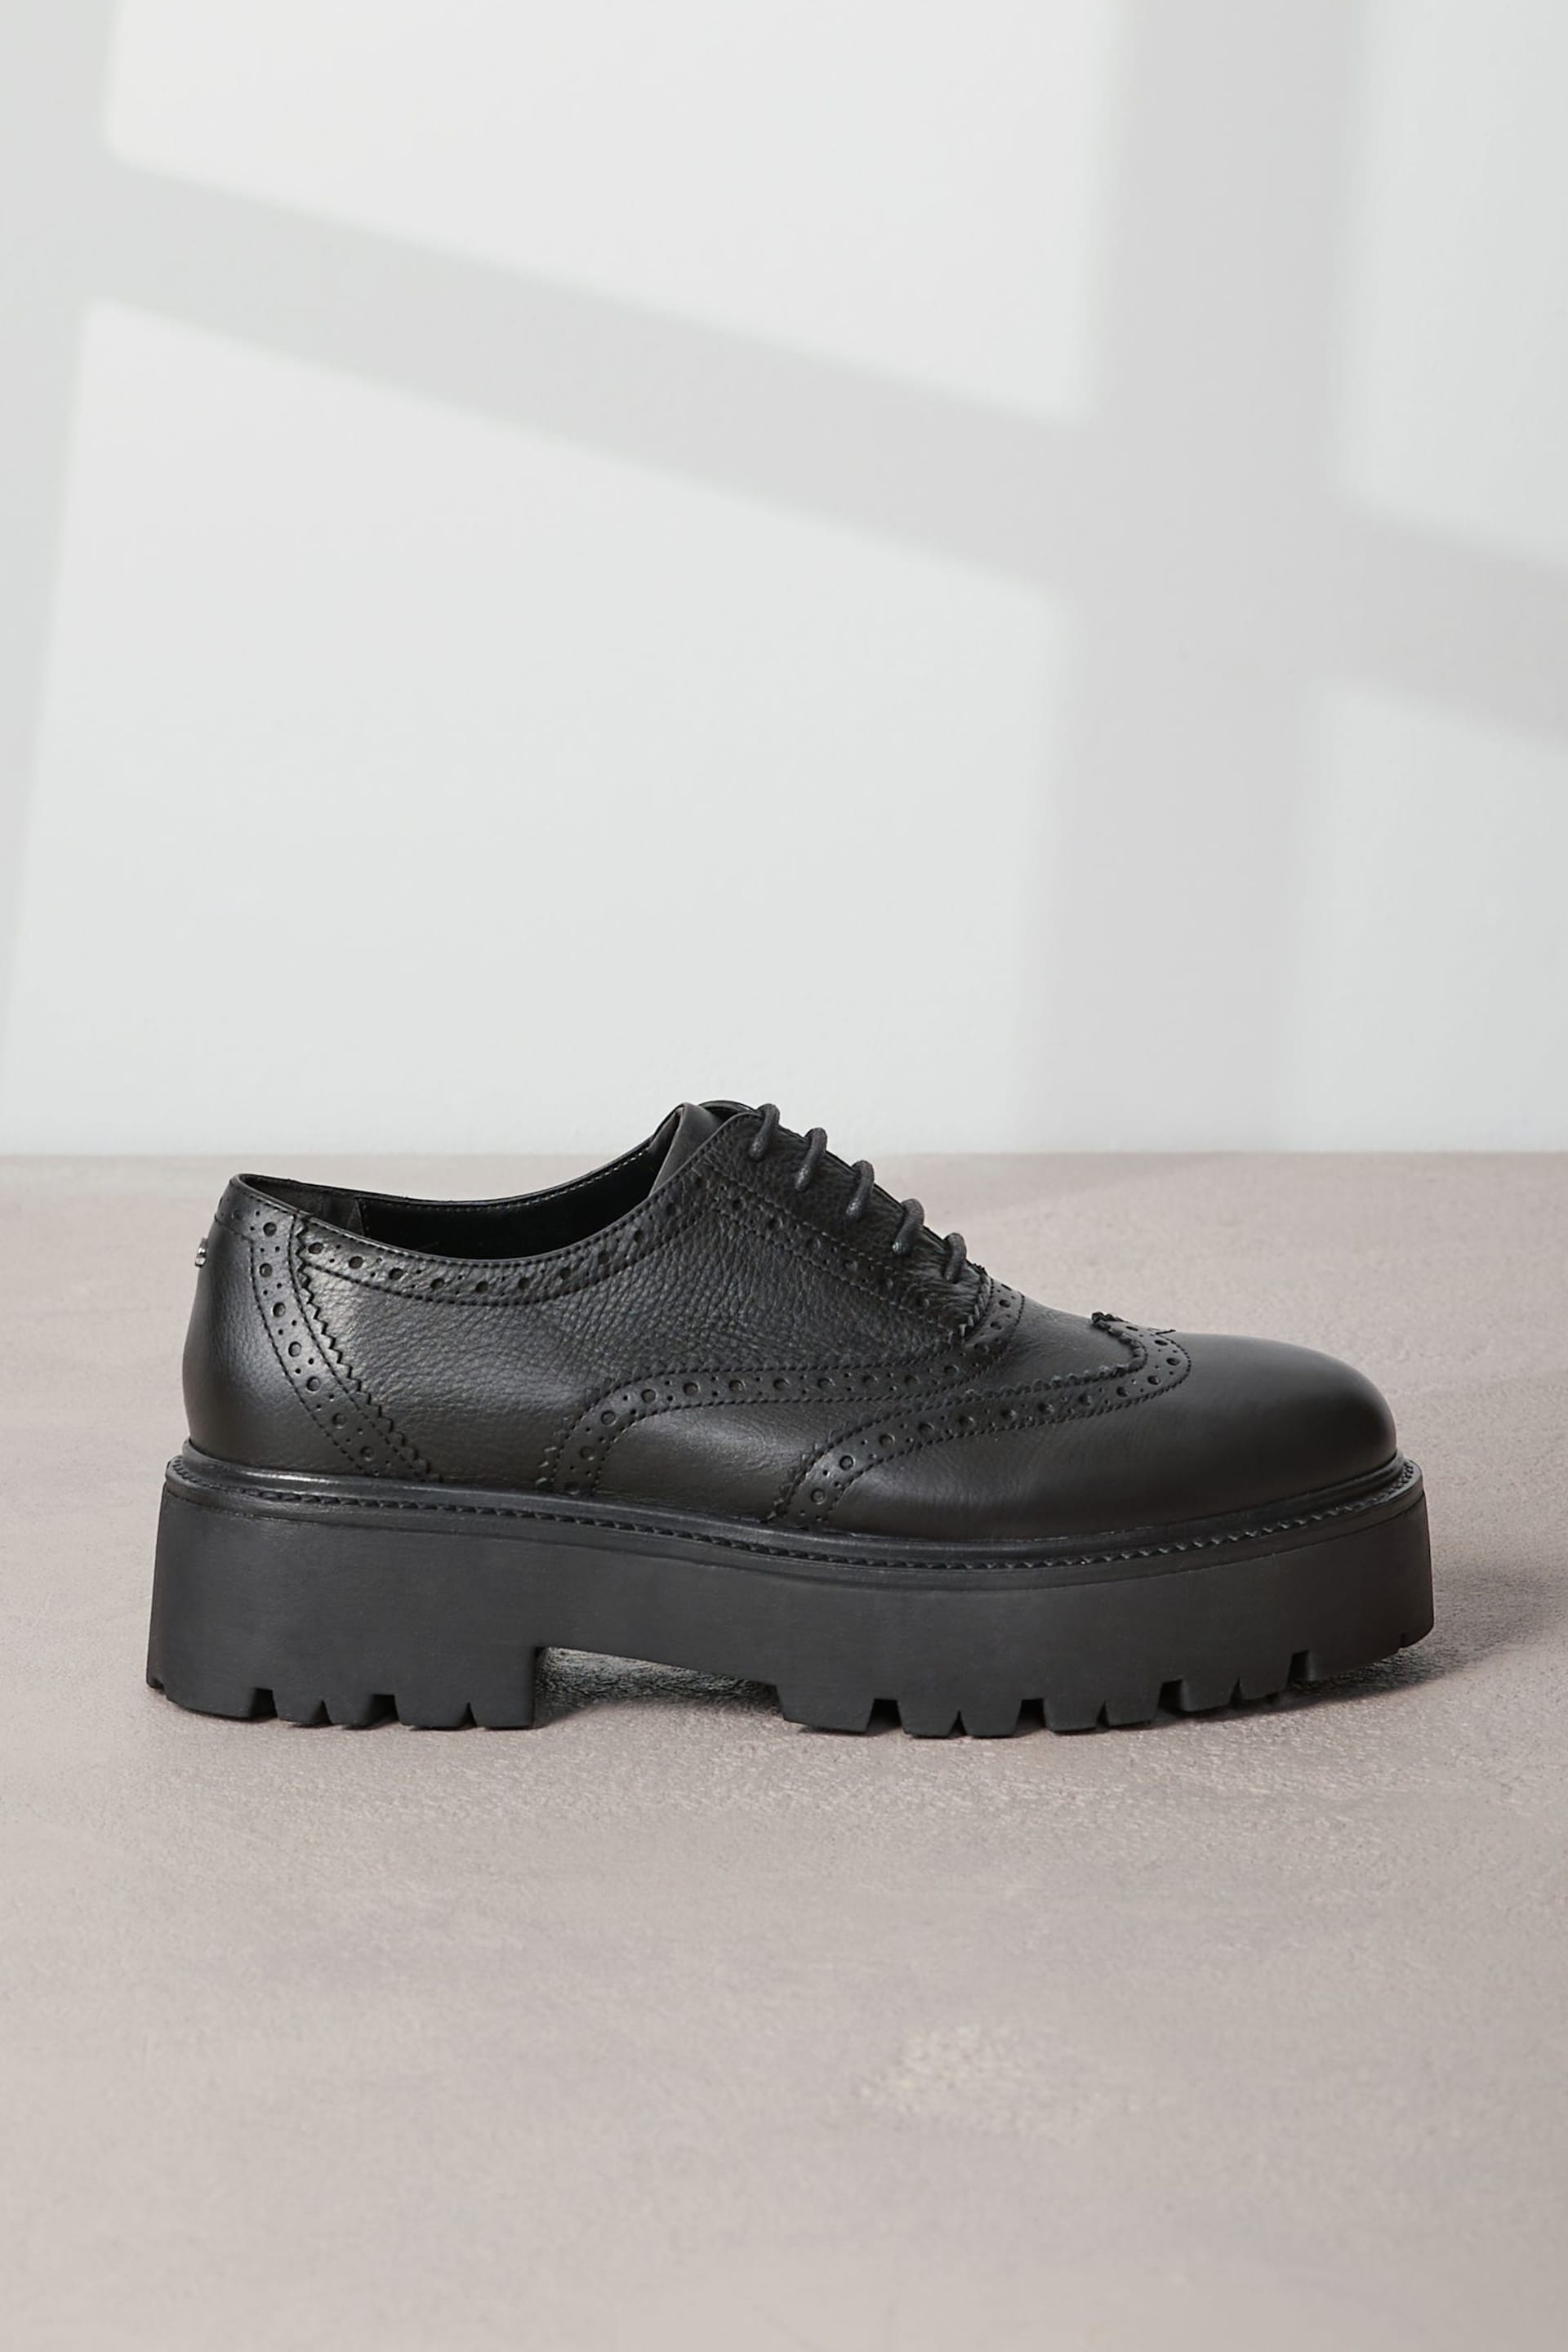 Black Signature Leather Chunky Brogue Lace Up Shoes - Image 2 of 6